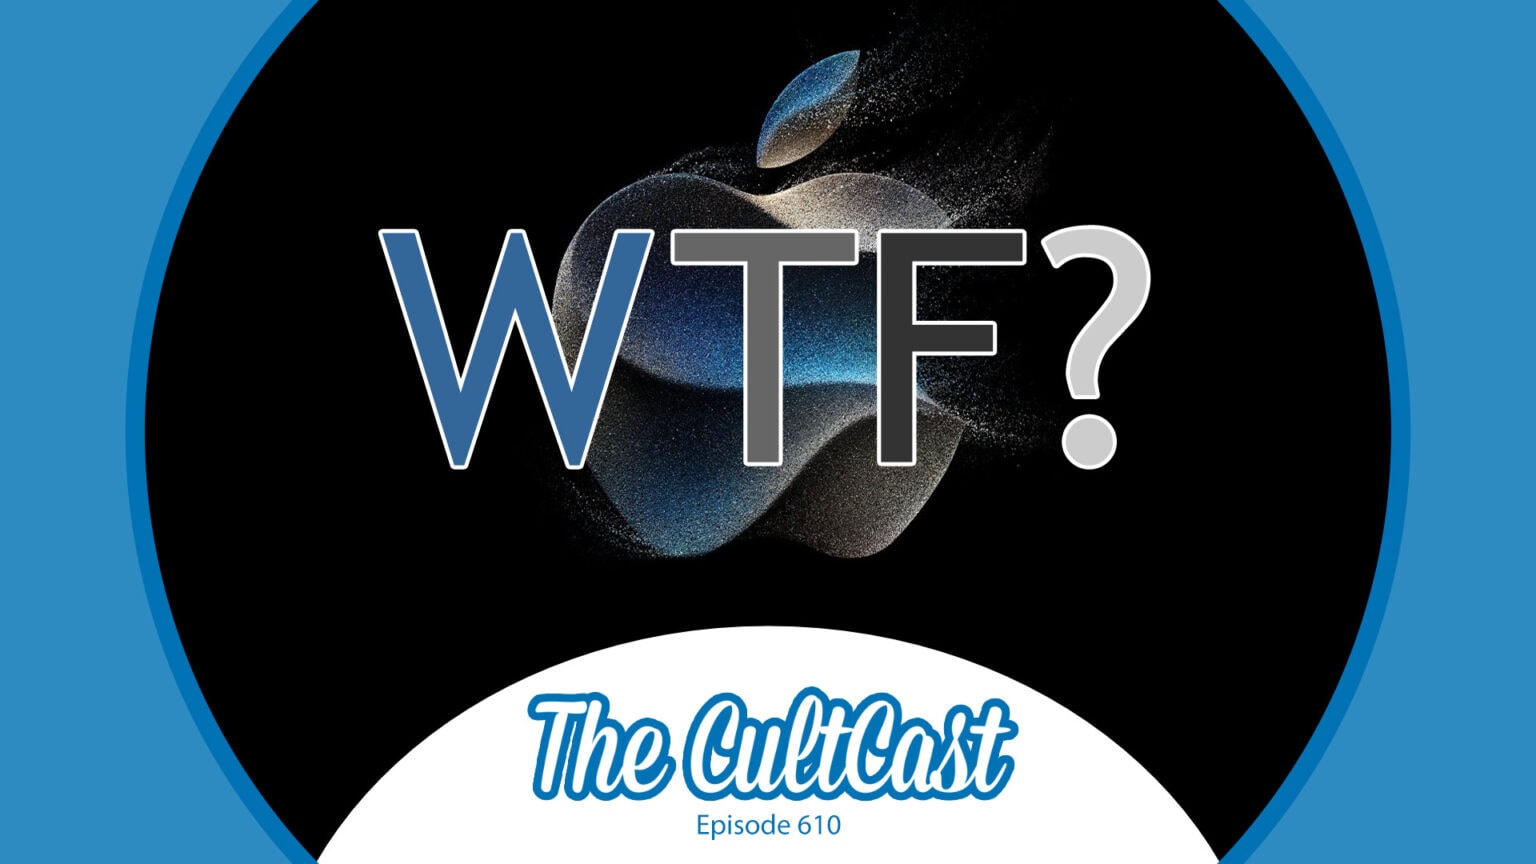 WTF? The CultCast episode 610, where we're discussing the Apple 